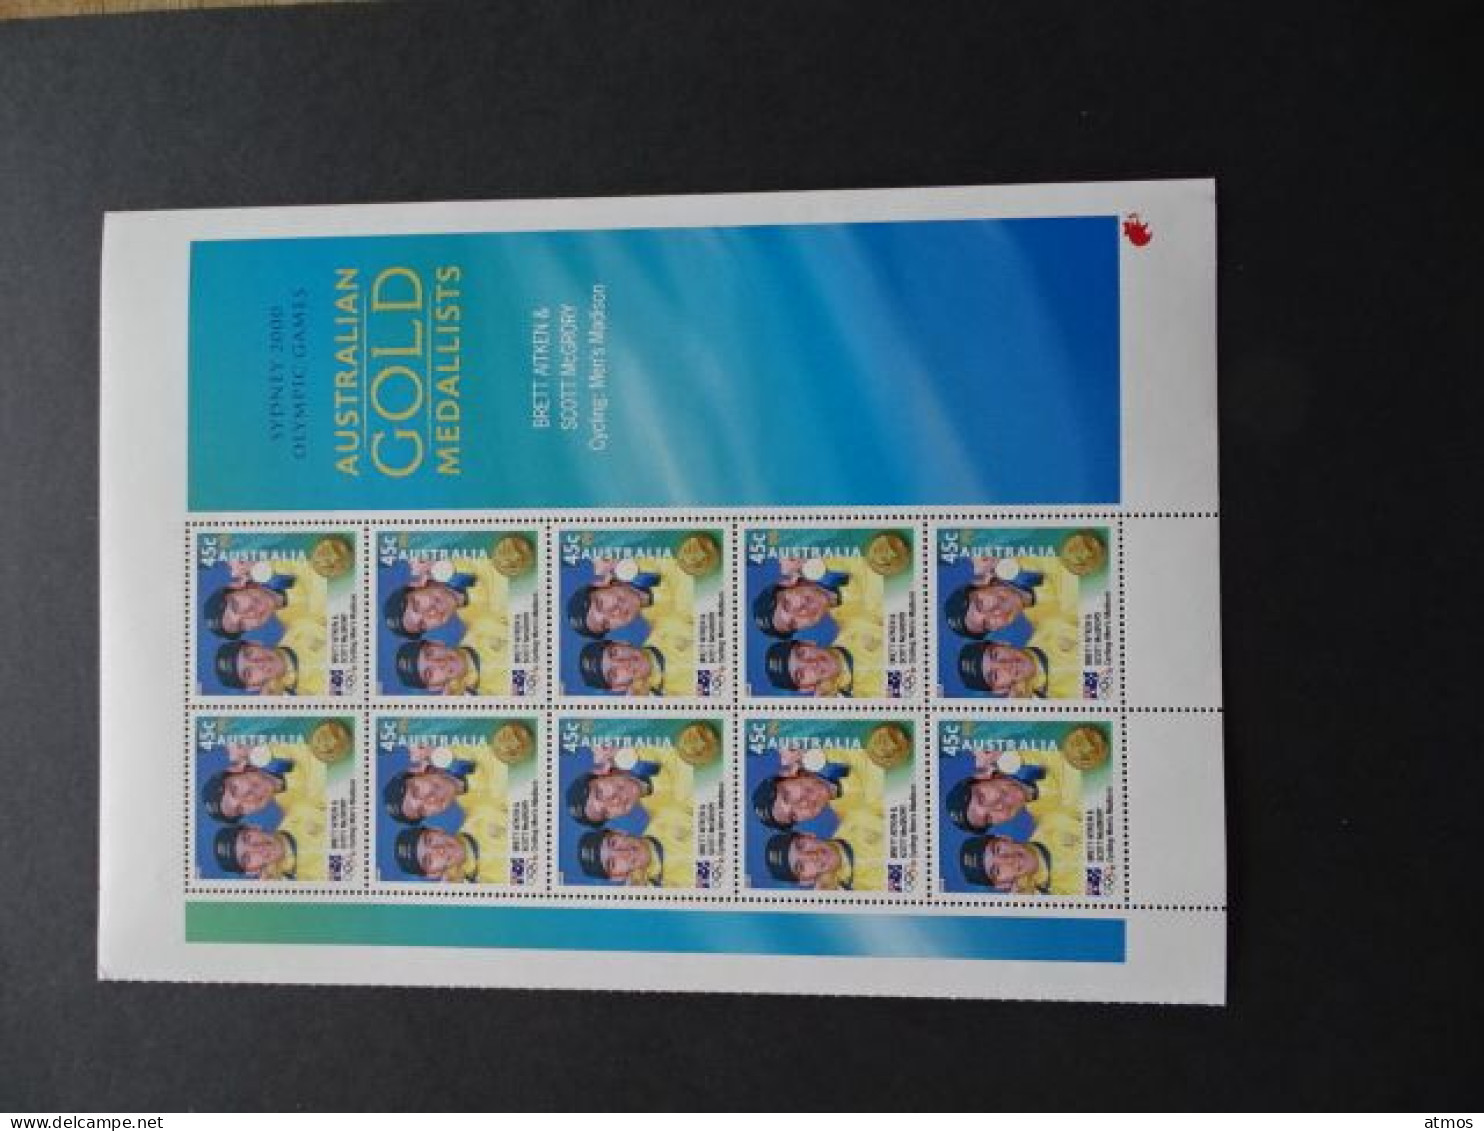 Australia MNH Michel Nr 1979 Sheet Of 10 From 2000 QLD - Mint Stamps